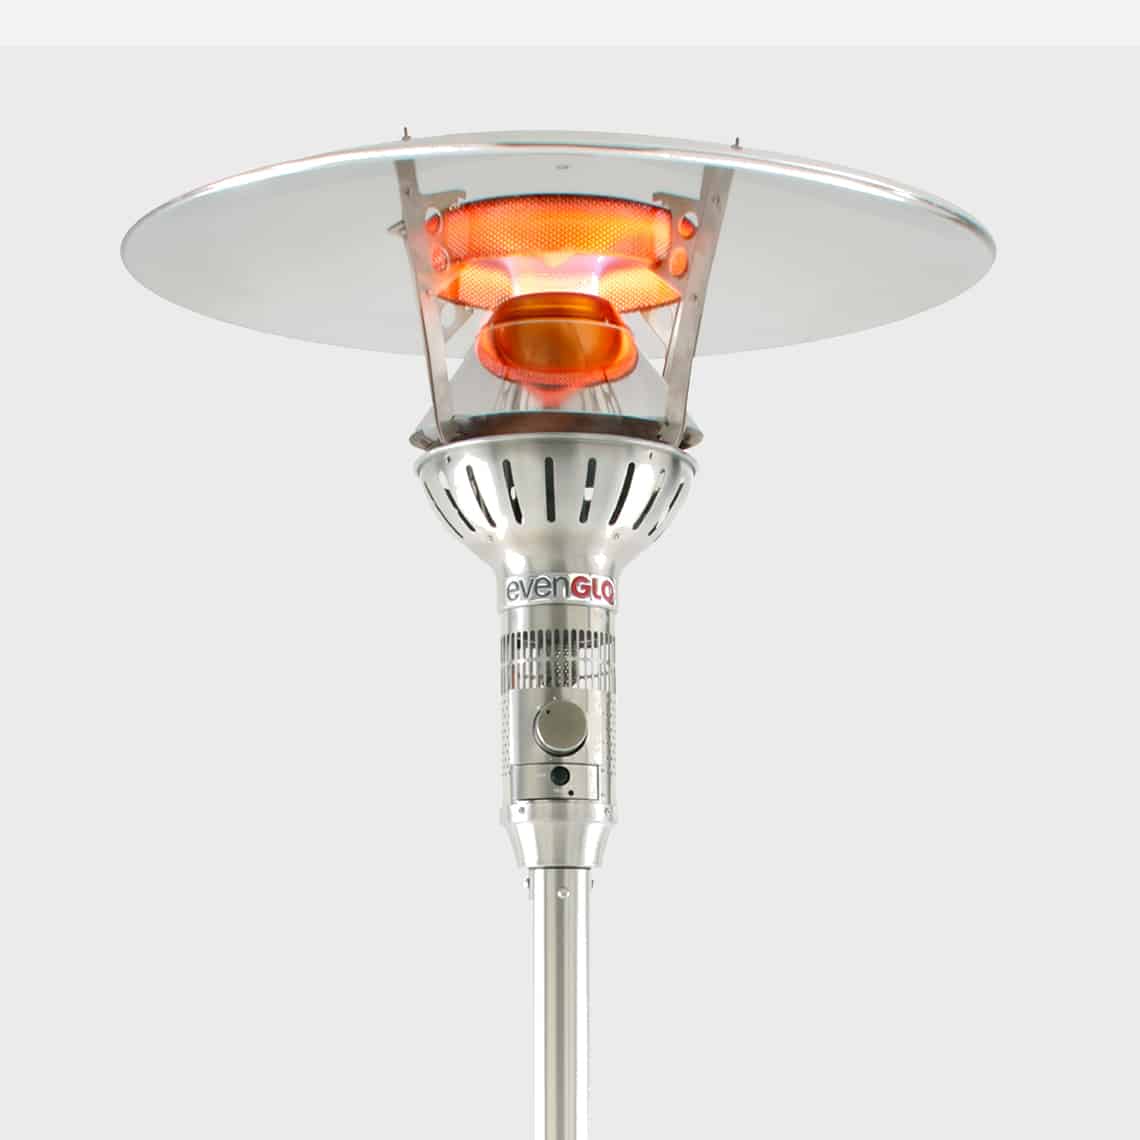 Best Infrared Patio Heater - Gas Or Propane - The EvenGLO